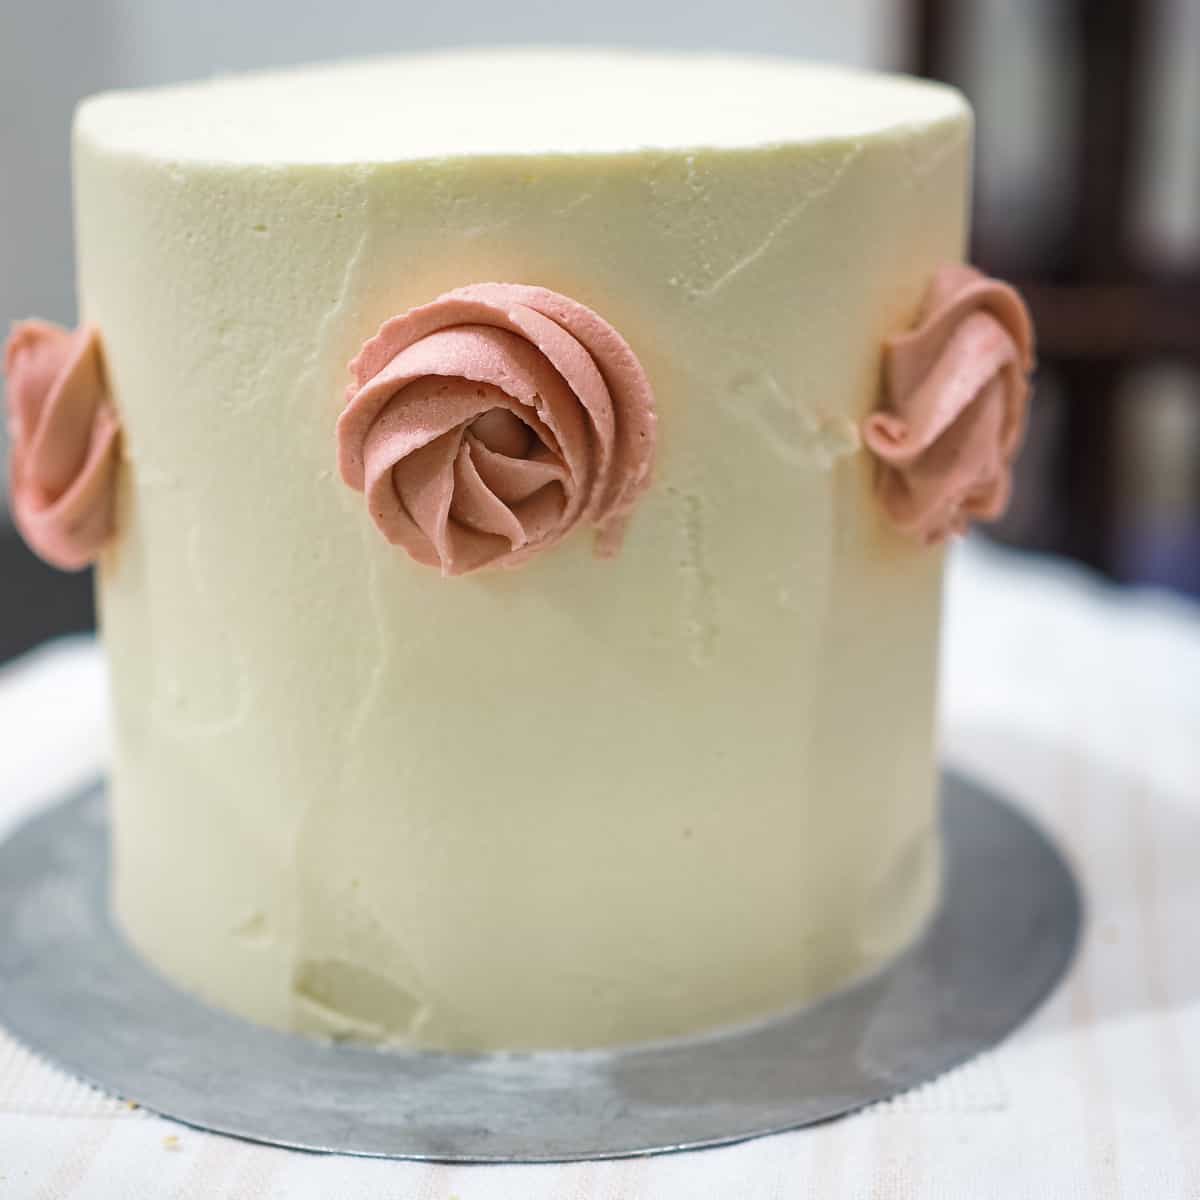 Pink buttercream roses on the side of a cake